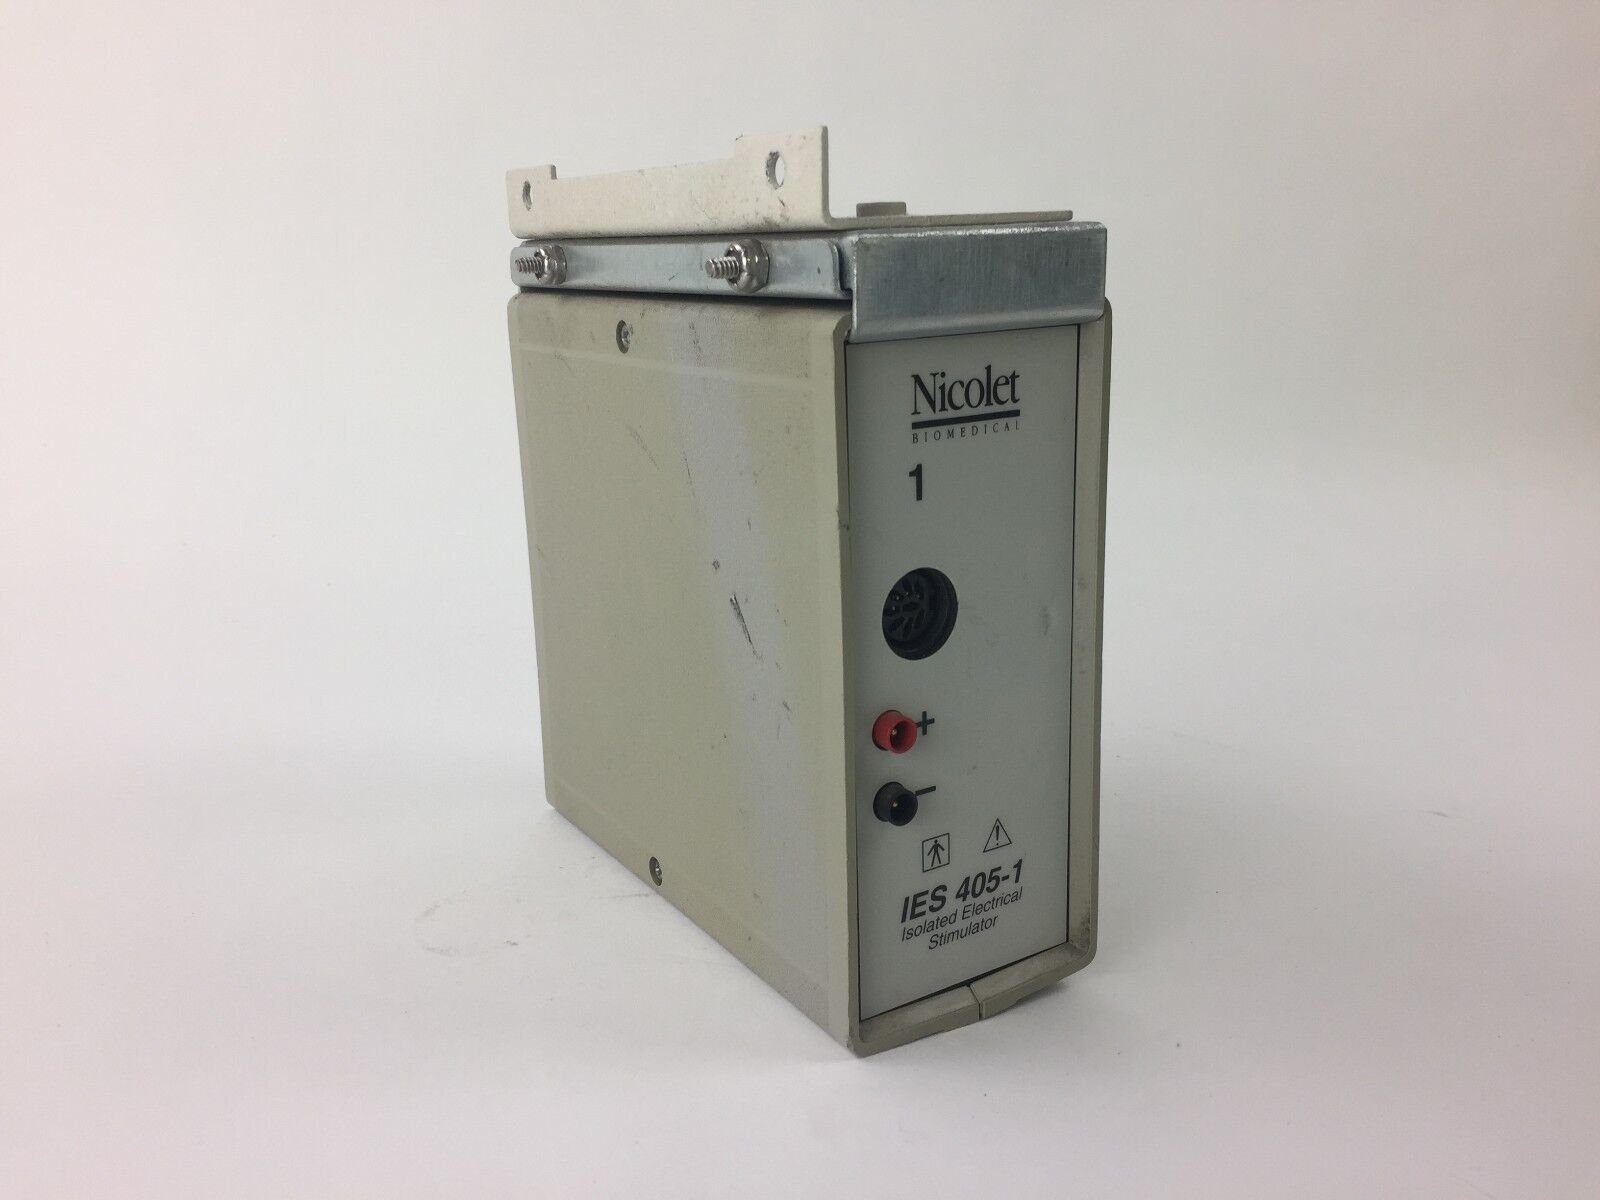 Nicolet Biomedical IES 405-1 Isolated Electrical Simulator